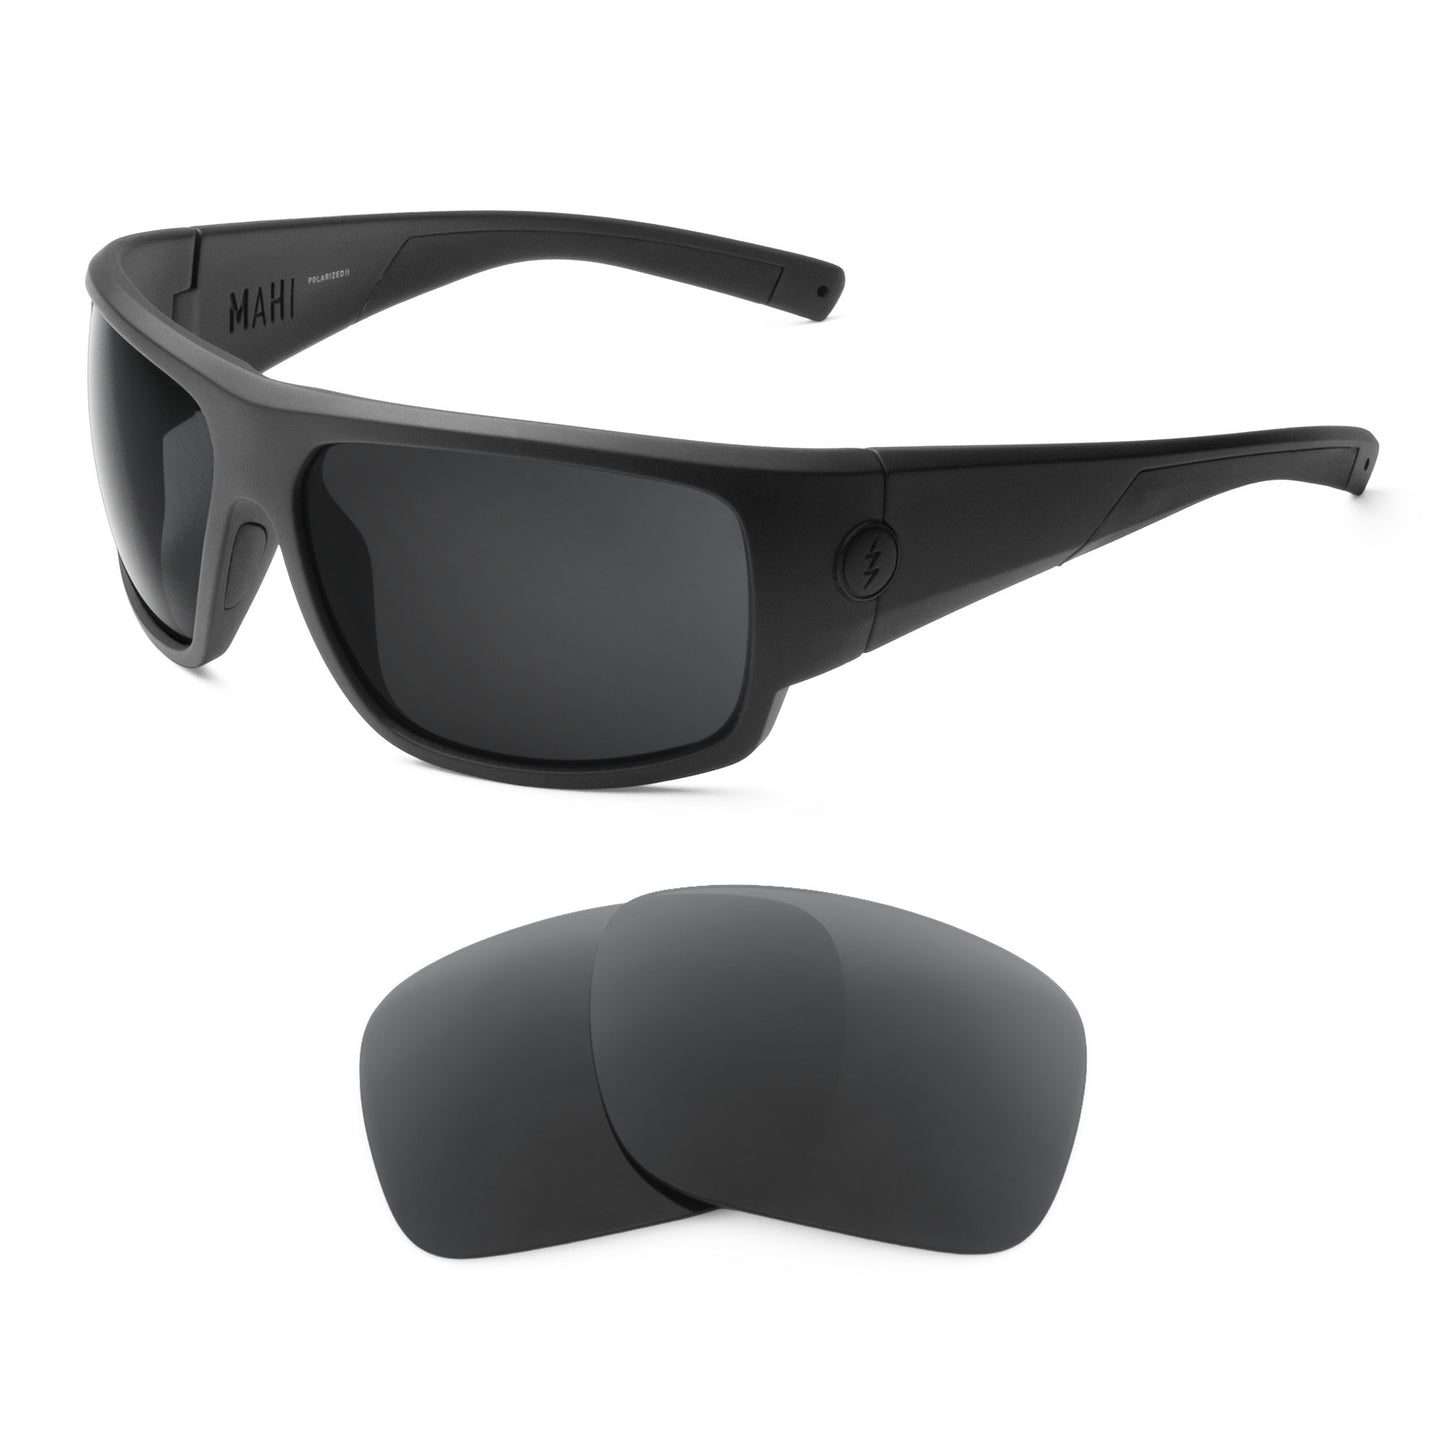 Electric Mahi sunglasses with replacement lenses